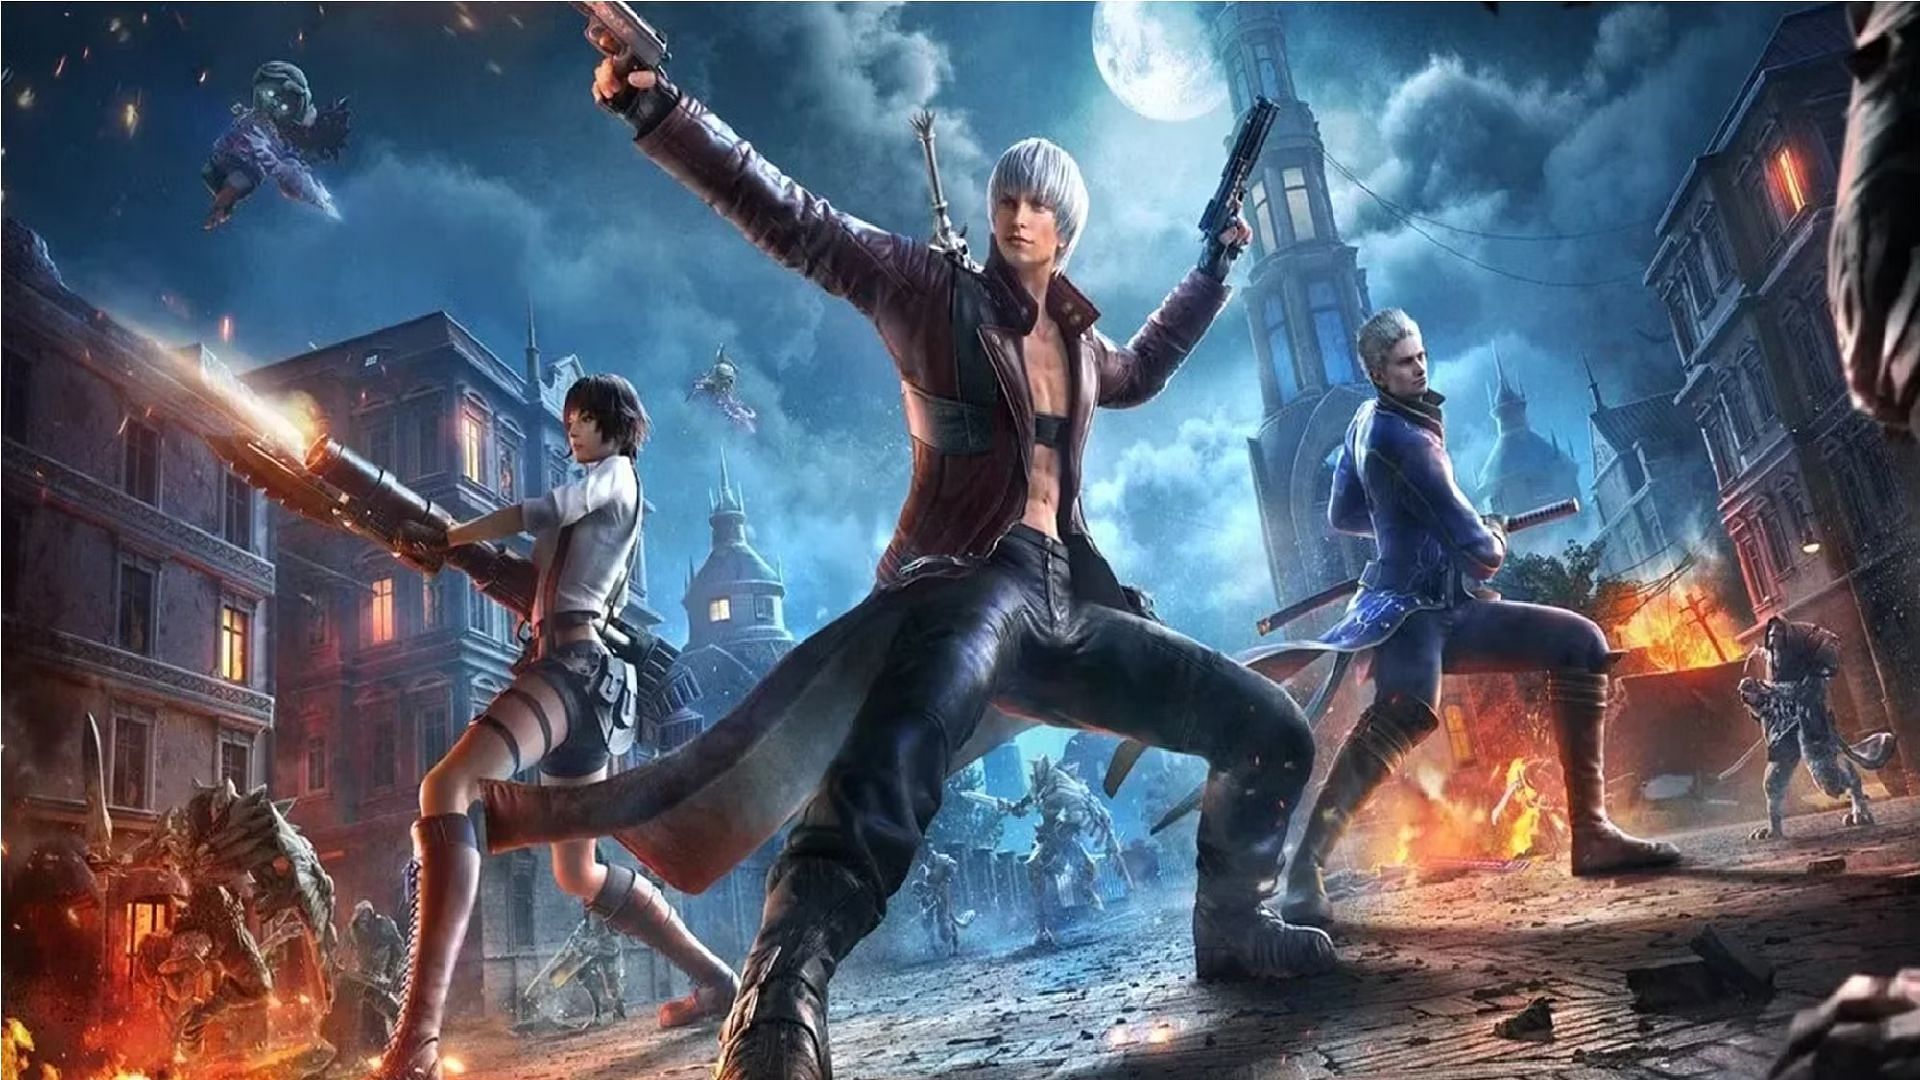 Devil May Cry Pinnacle of Combat. Devil May Cry 3 Pinnacle of Combat. DMC Devil May Cry Peak of Combat. Devil May Cry mobile.